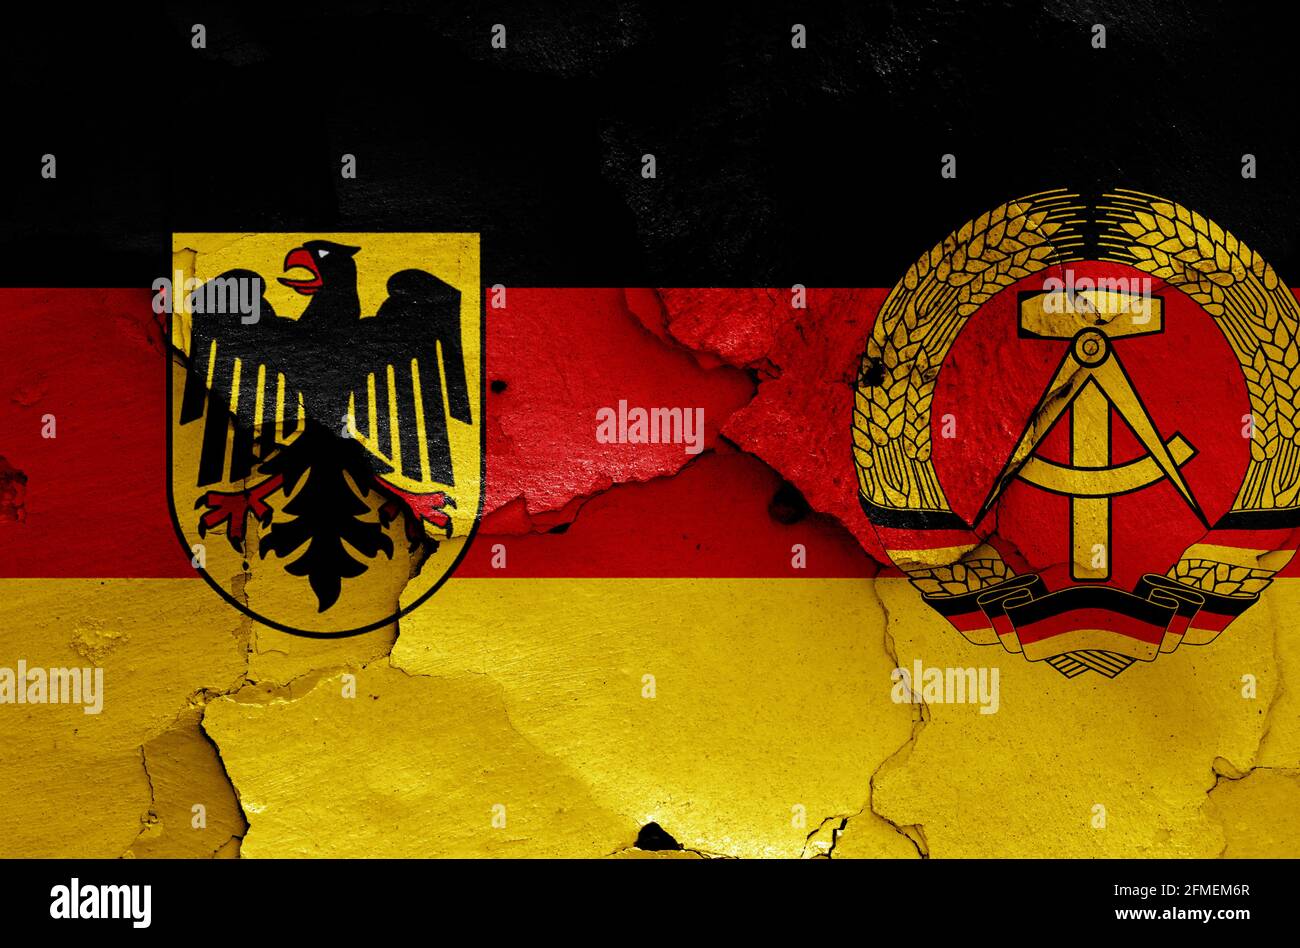 historical flags of West Germany and East Germany painted on cracked wall Stock Photo